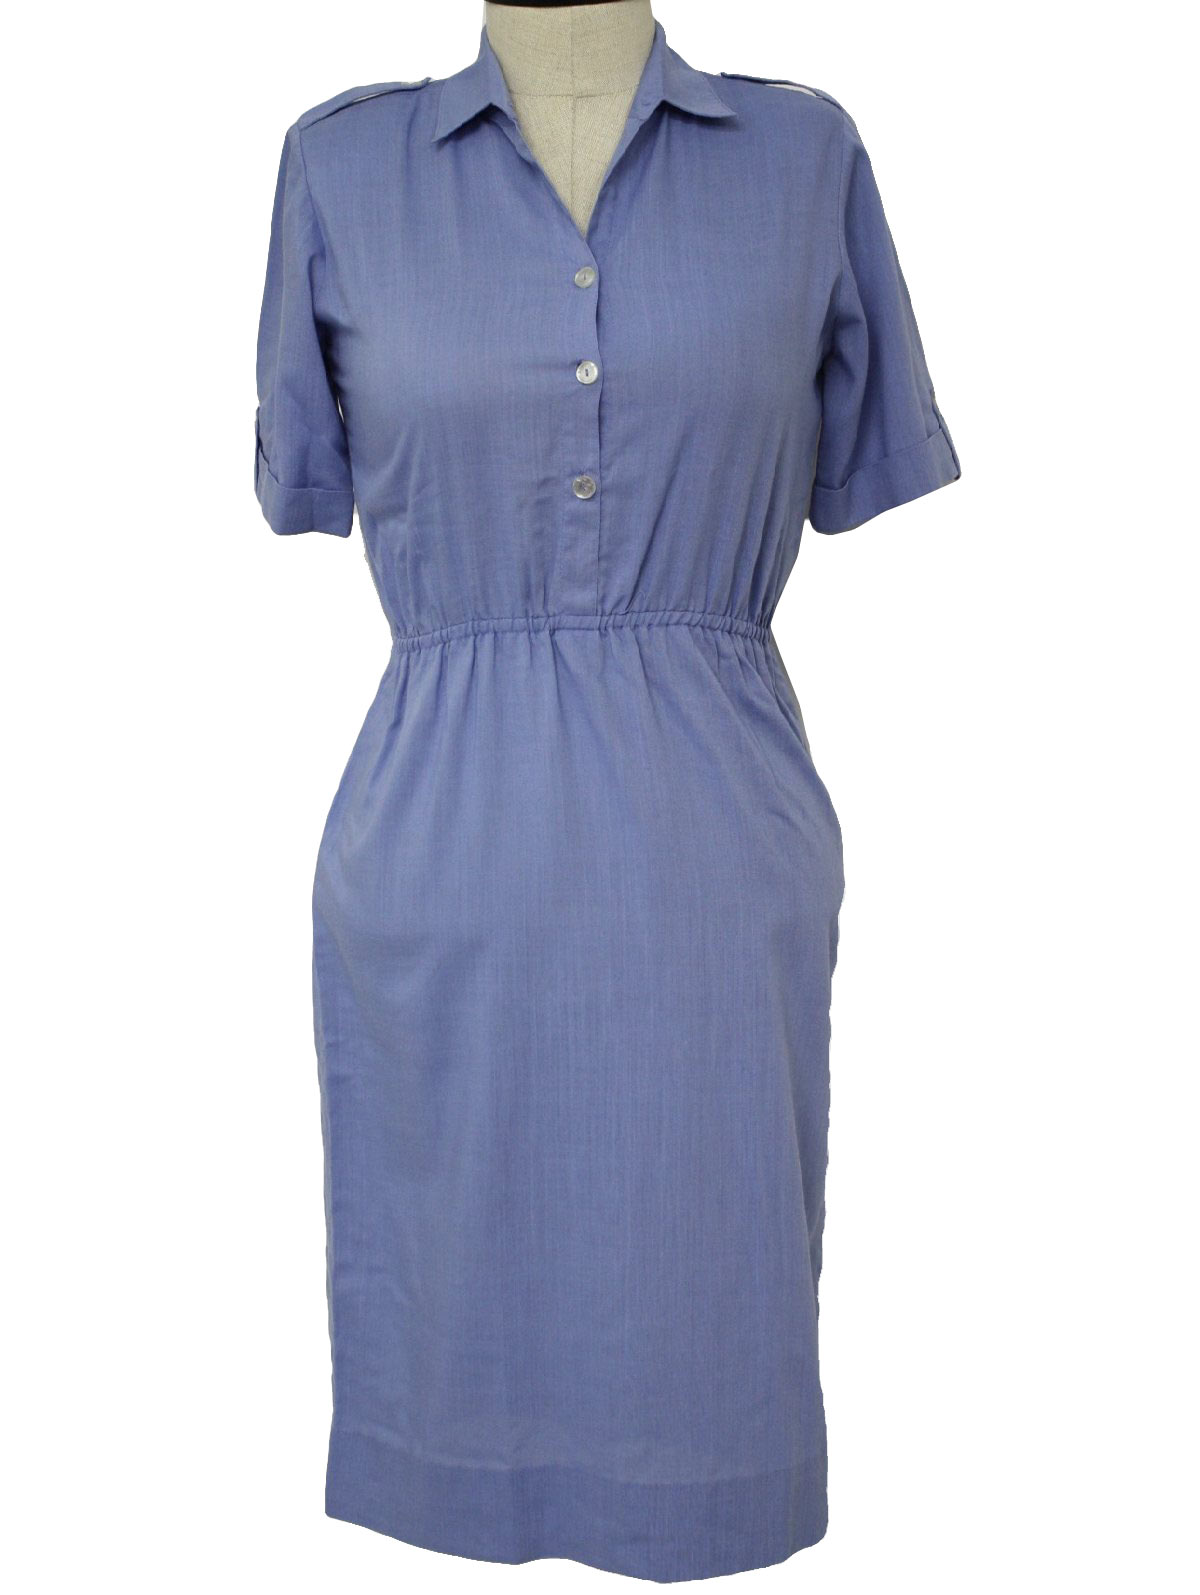 Vintage 1950's Cotton Dress: 50s style (made in 80s) -Missing Label ...